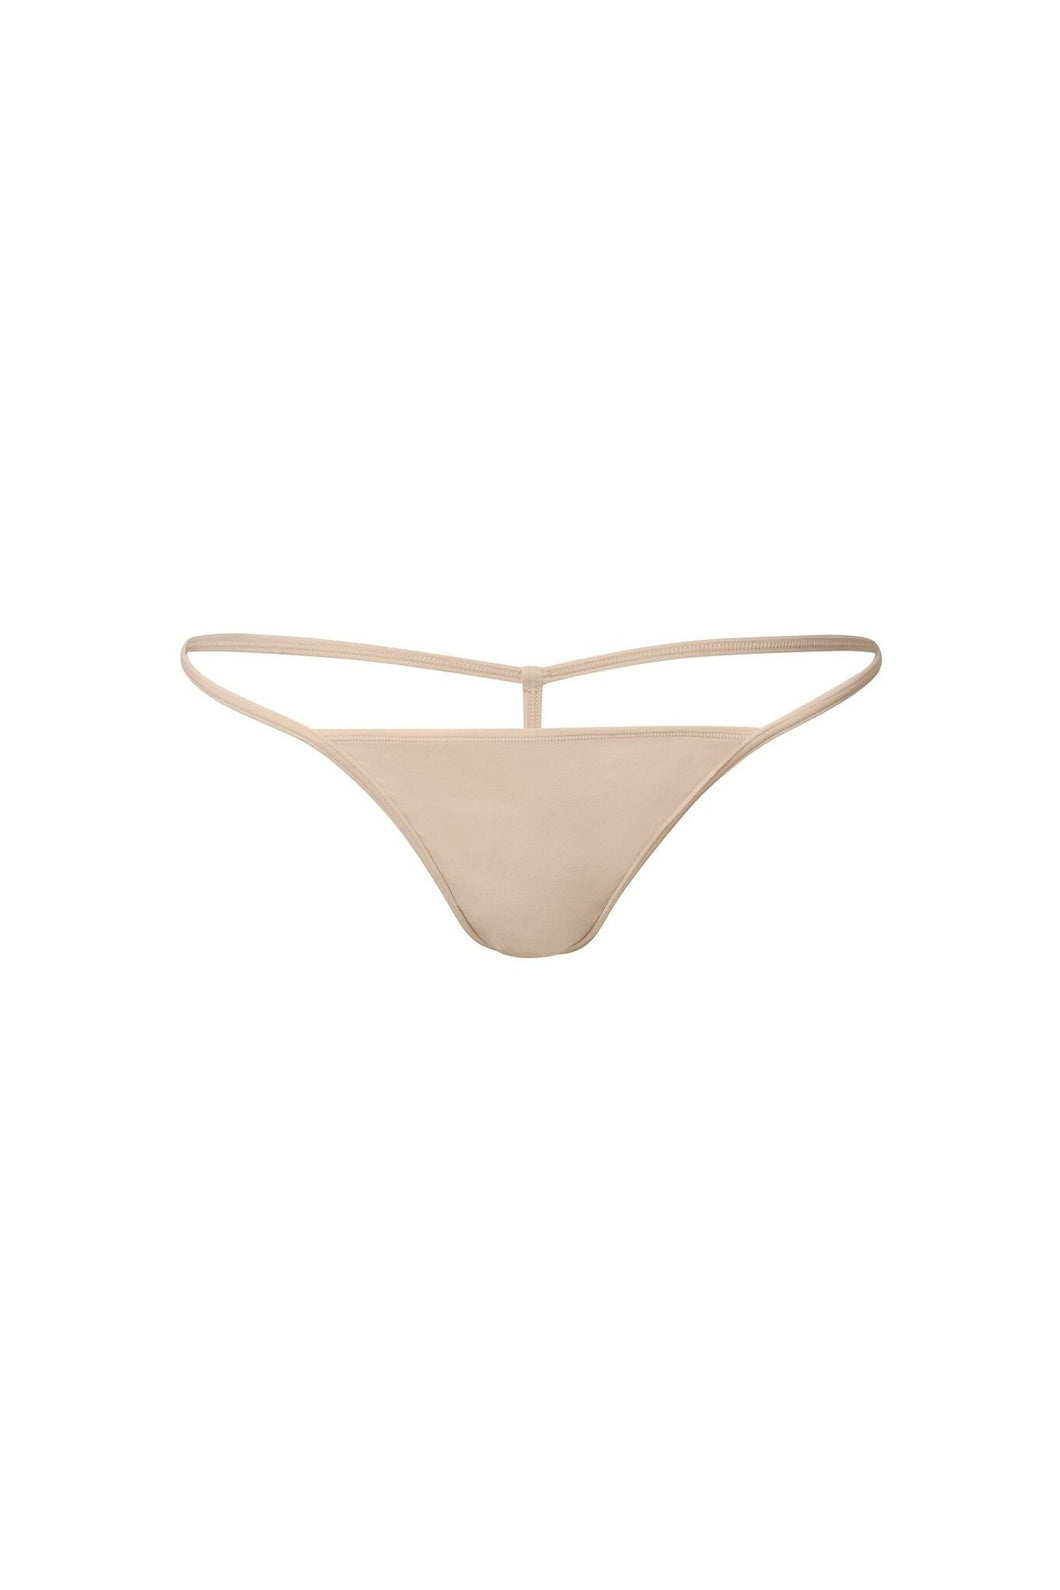 nueskin Irina No-Cut G-String in color Appleblossom and shape thong